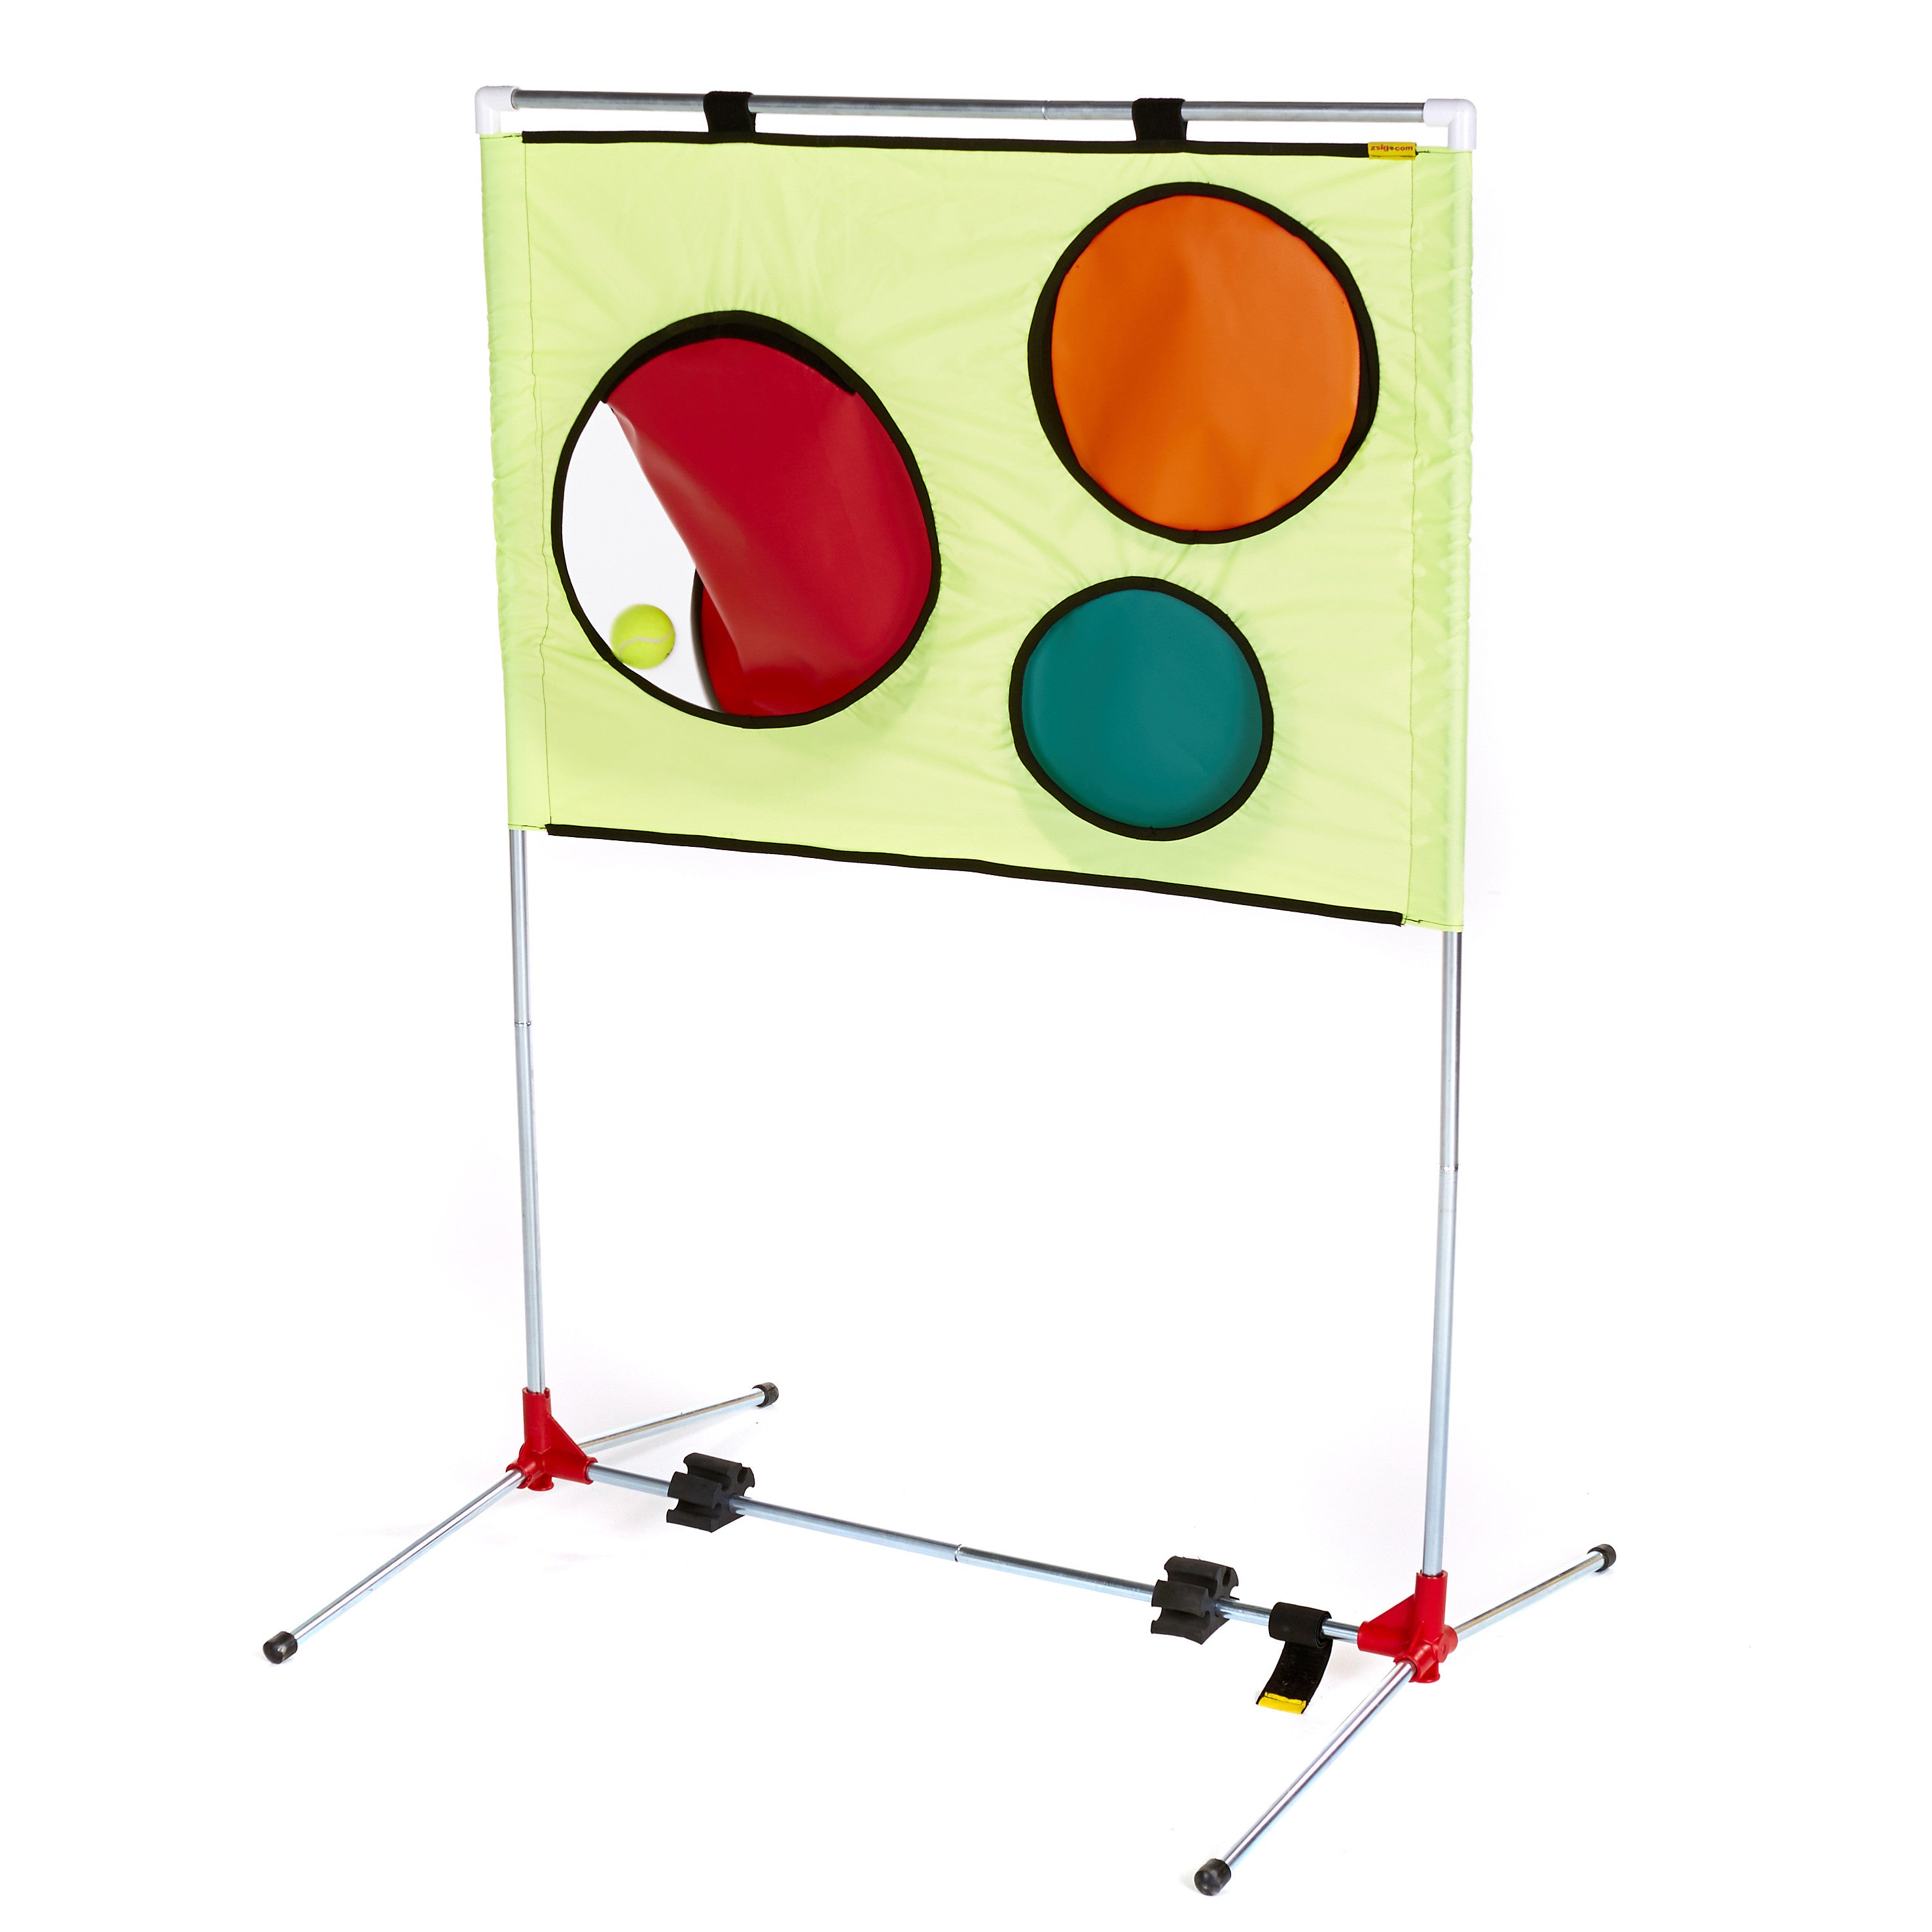 Tennis Coaching Aid. Portable frame with removable coloured spot targets.